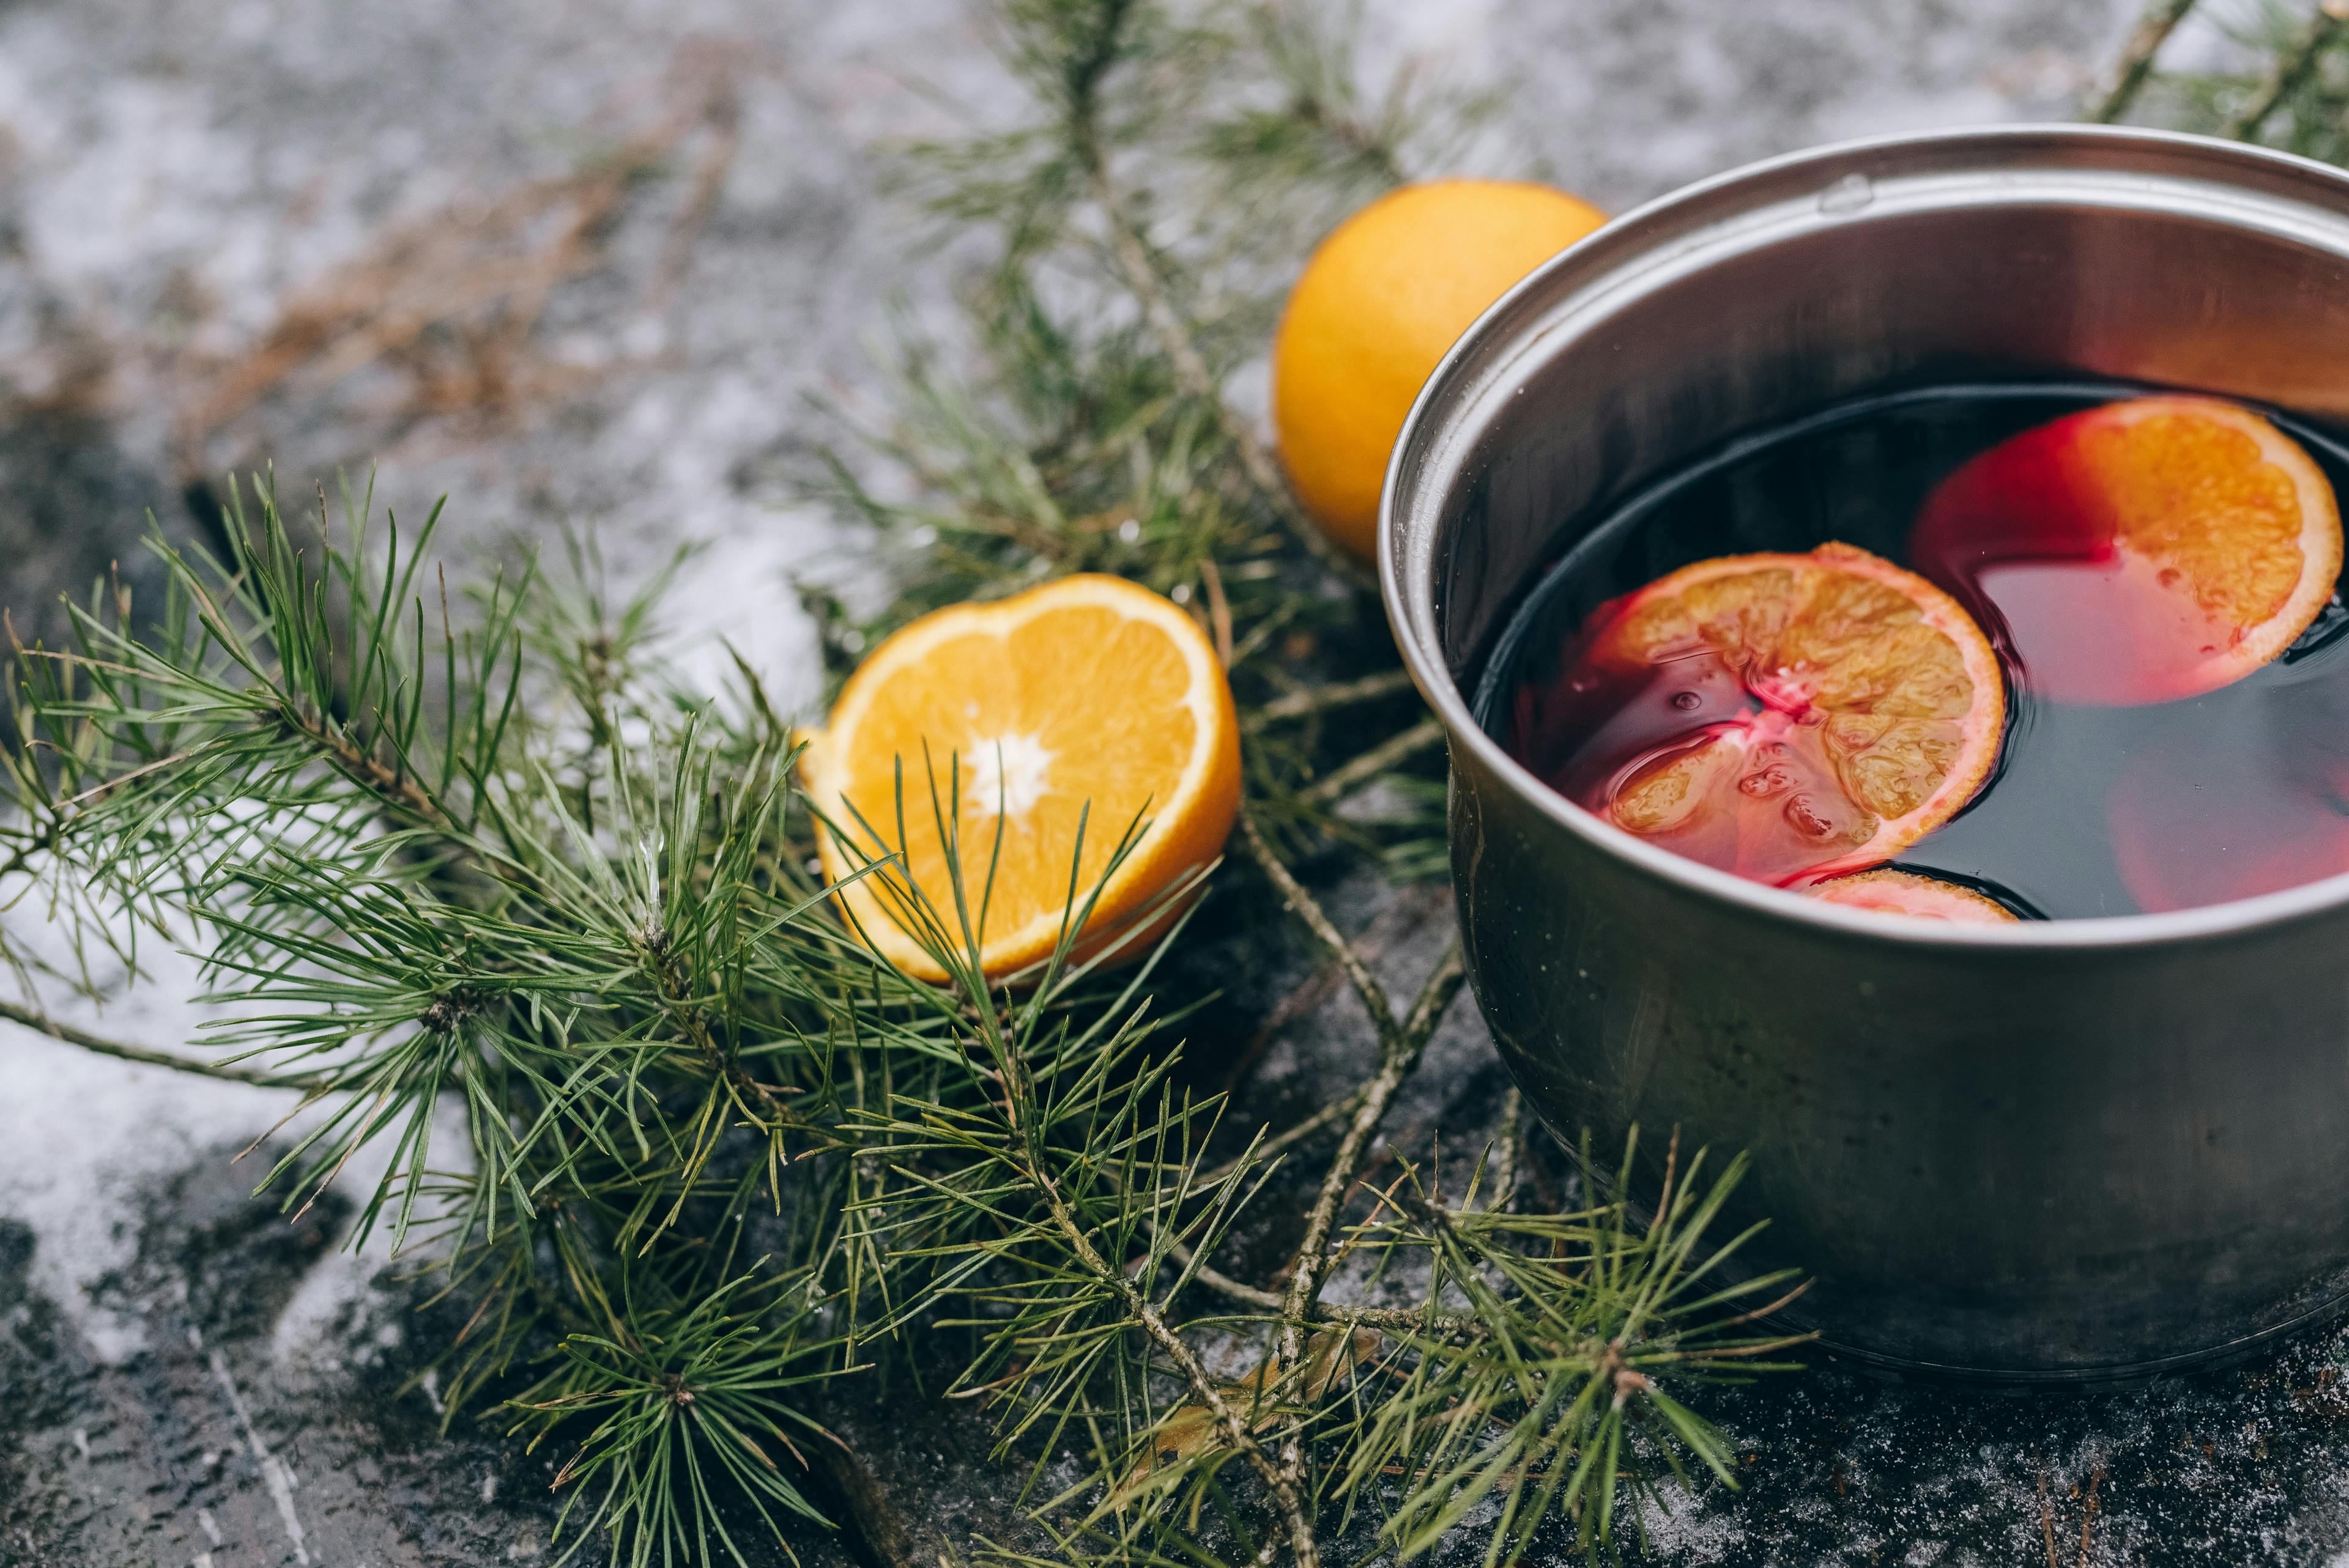 Mulled wine being prepared in a pot on holiday